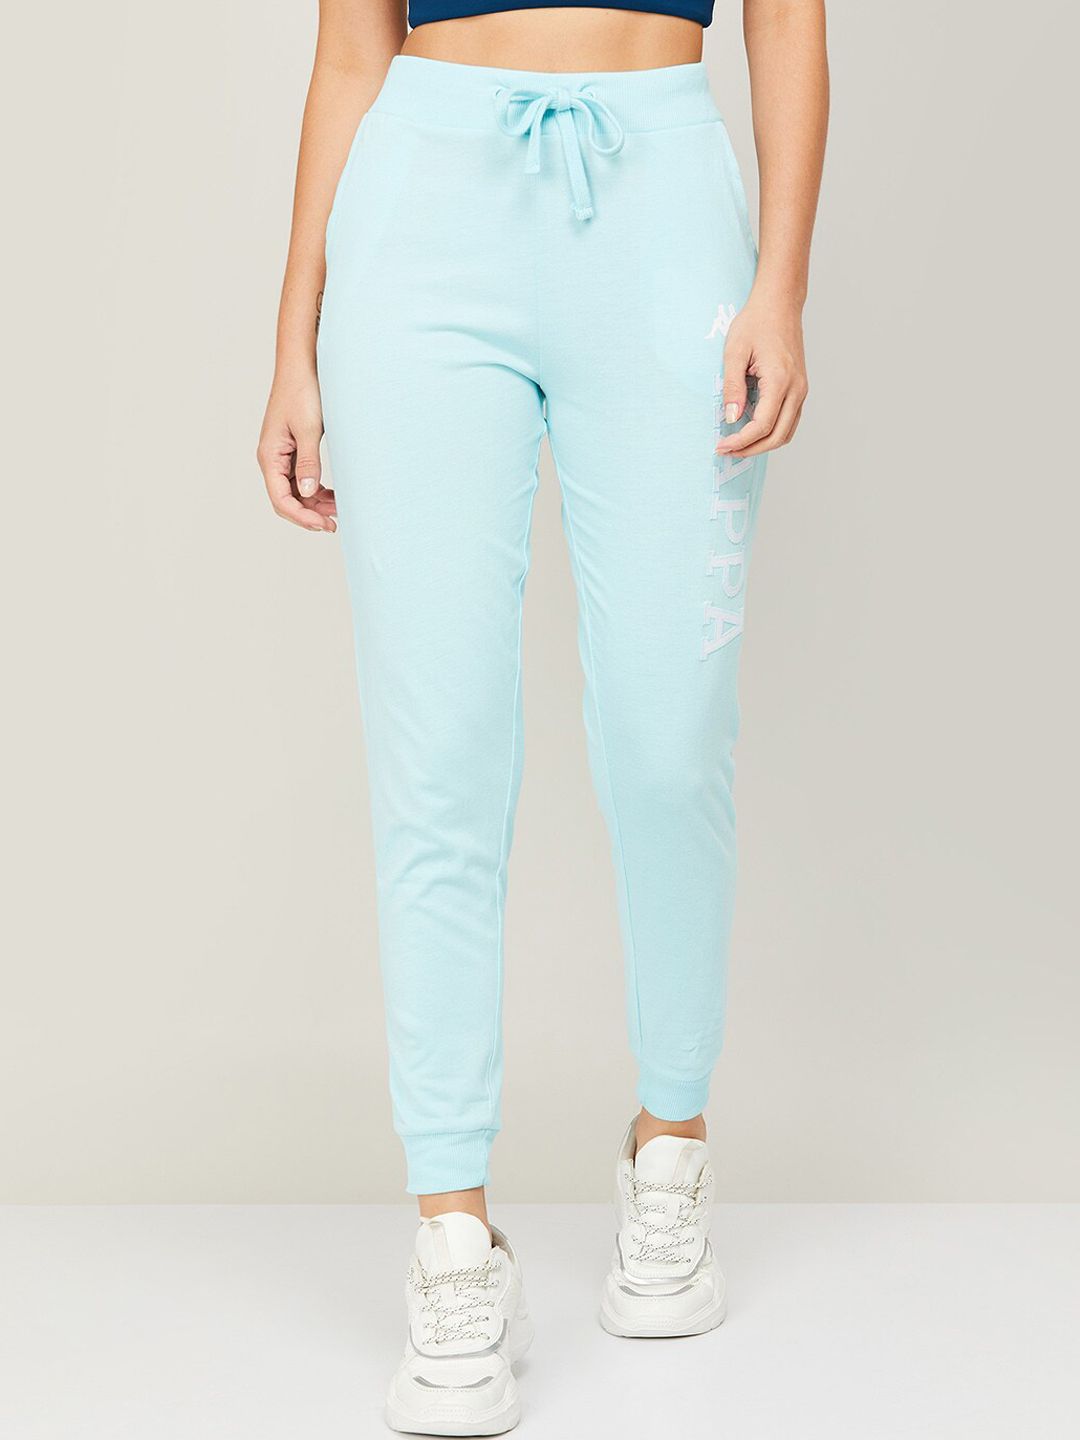 Kappa Women Blue Solid Cotton Joggers Price in India